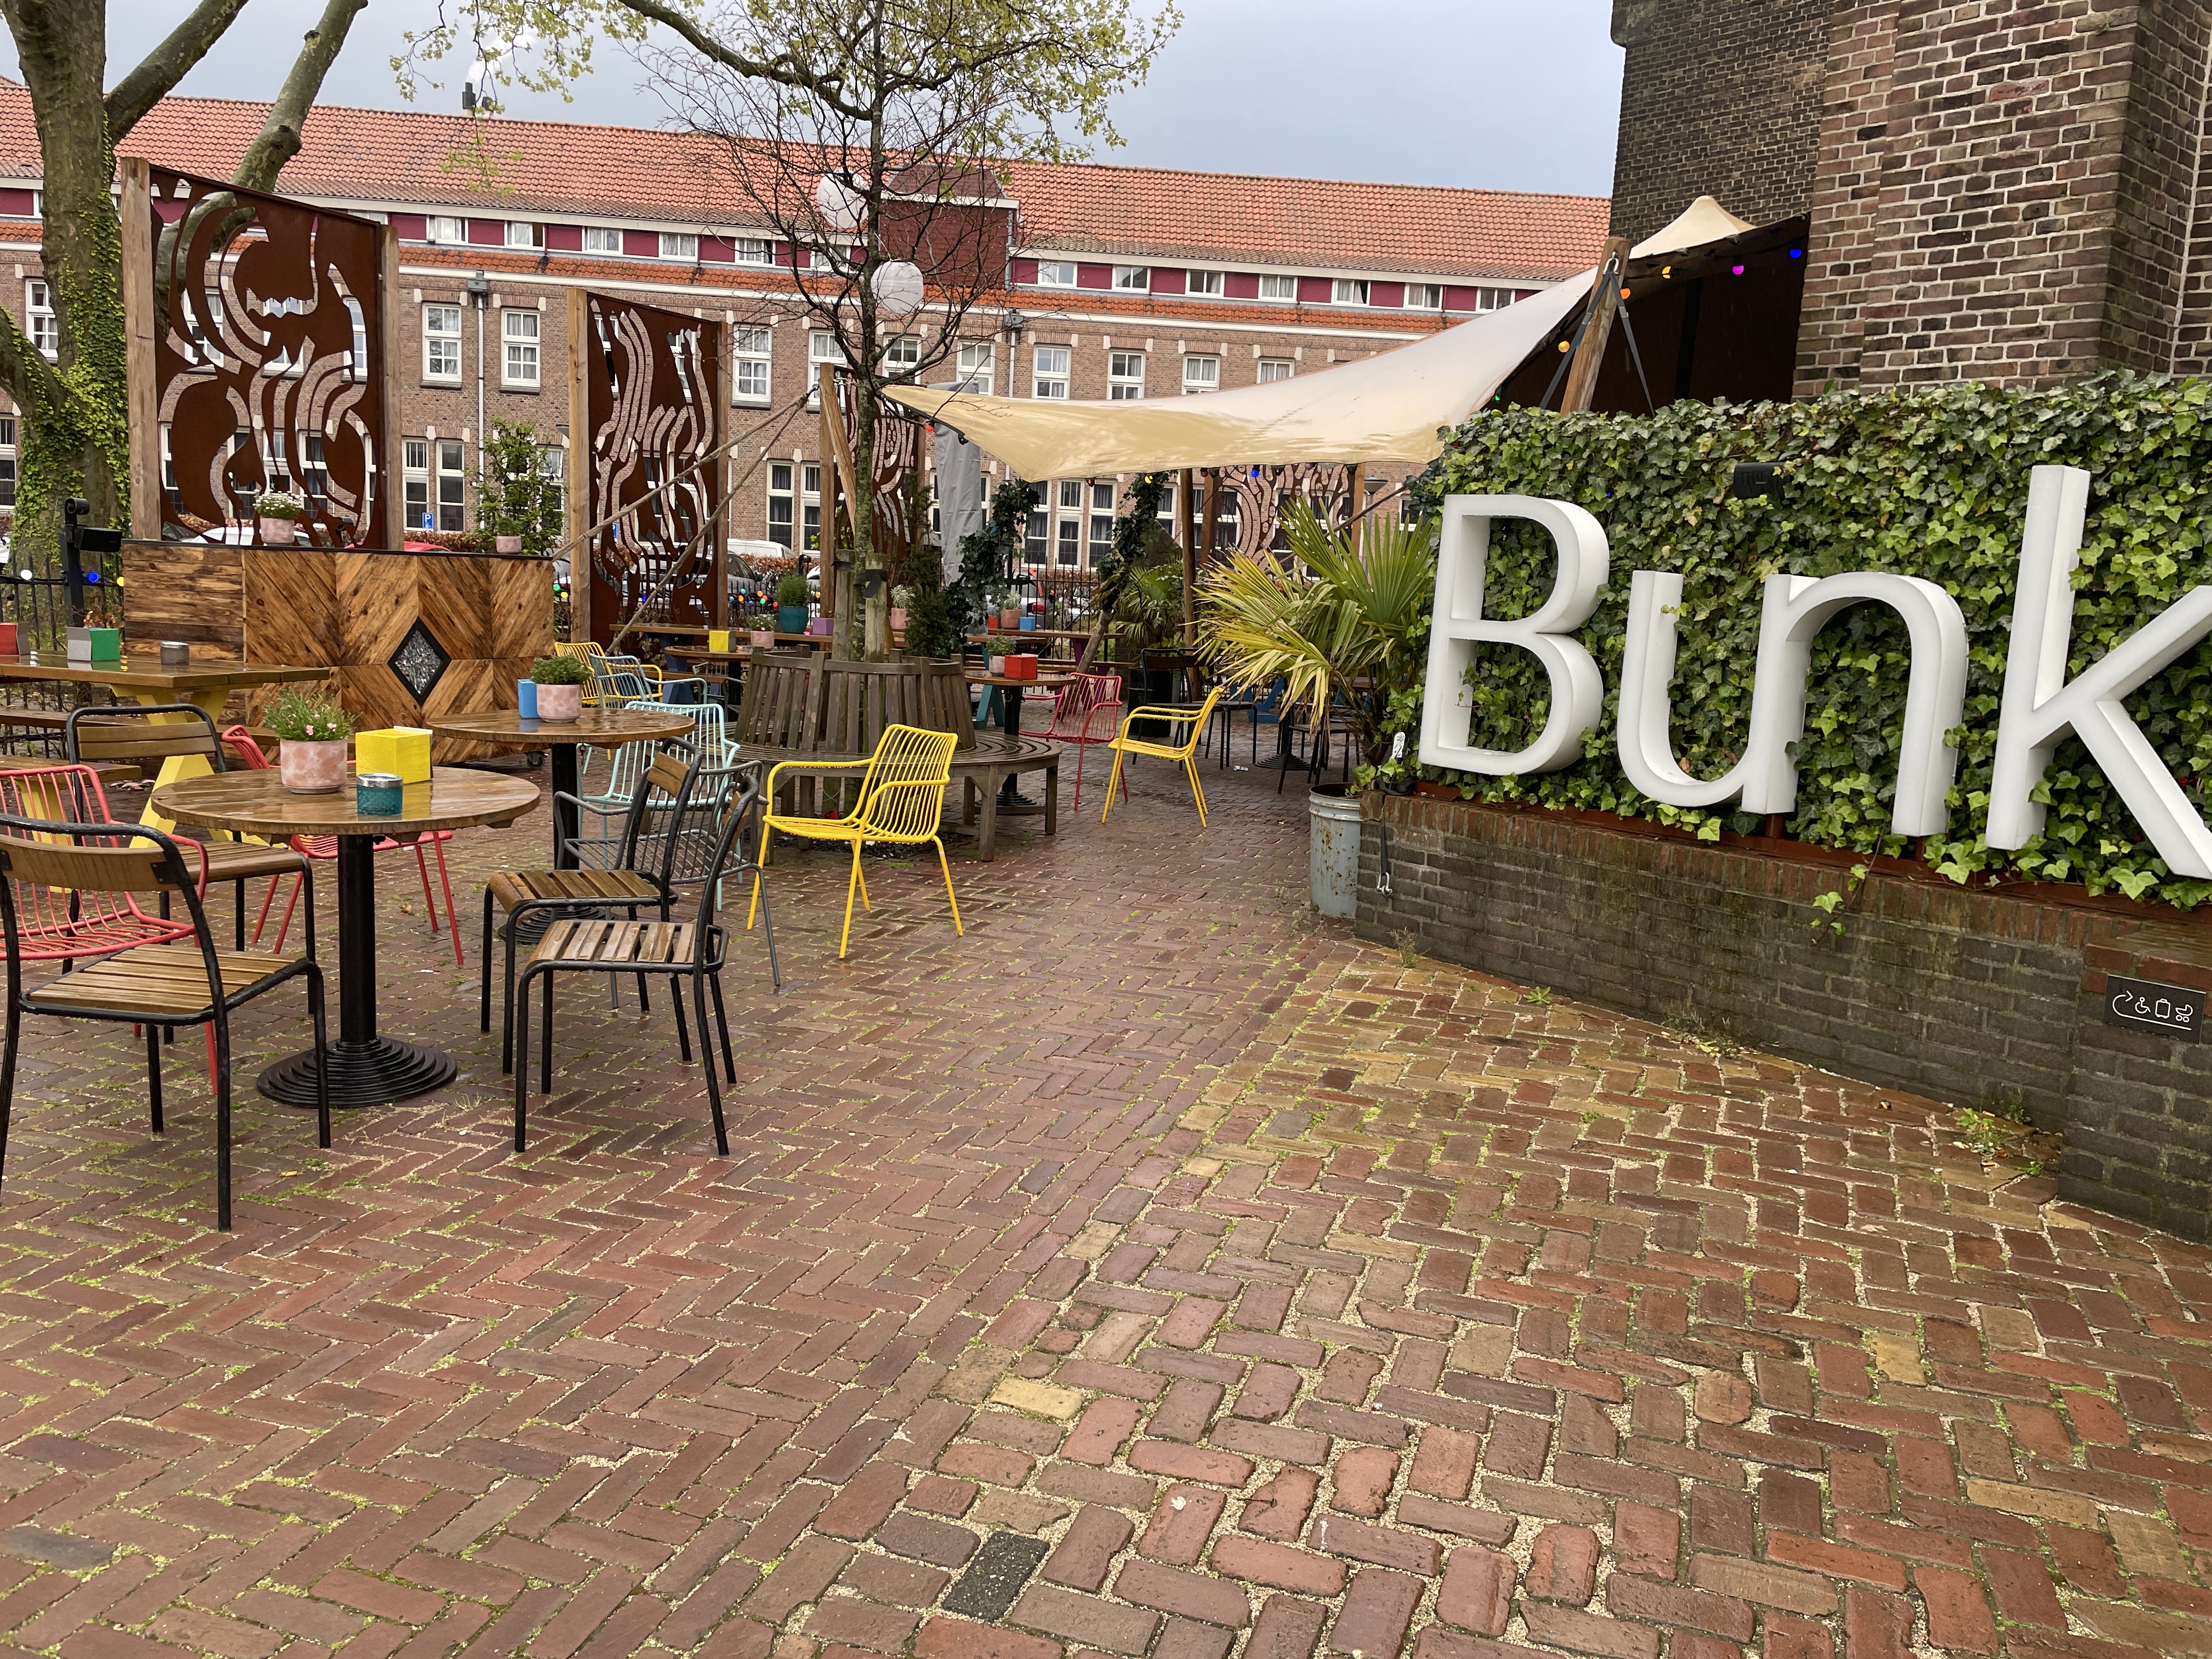 Bunk: Delicious meals in a former church in Amsterdam North